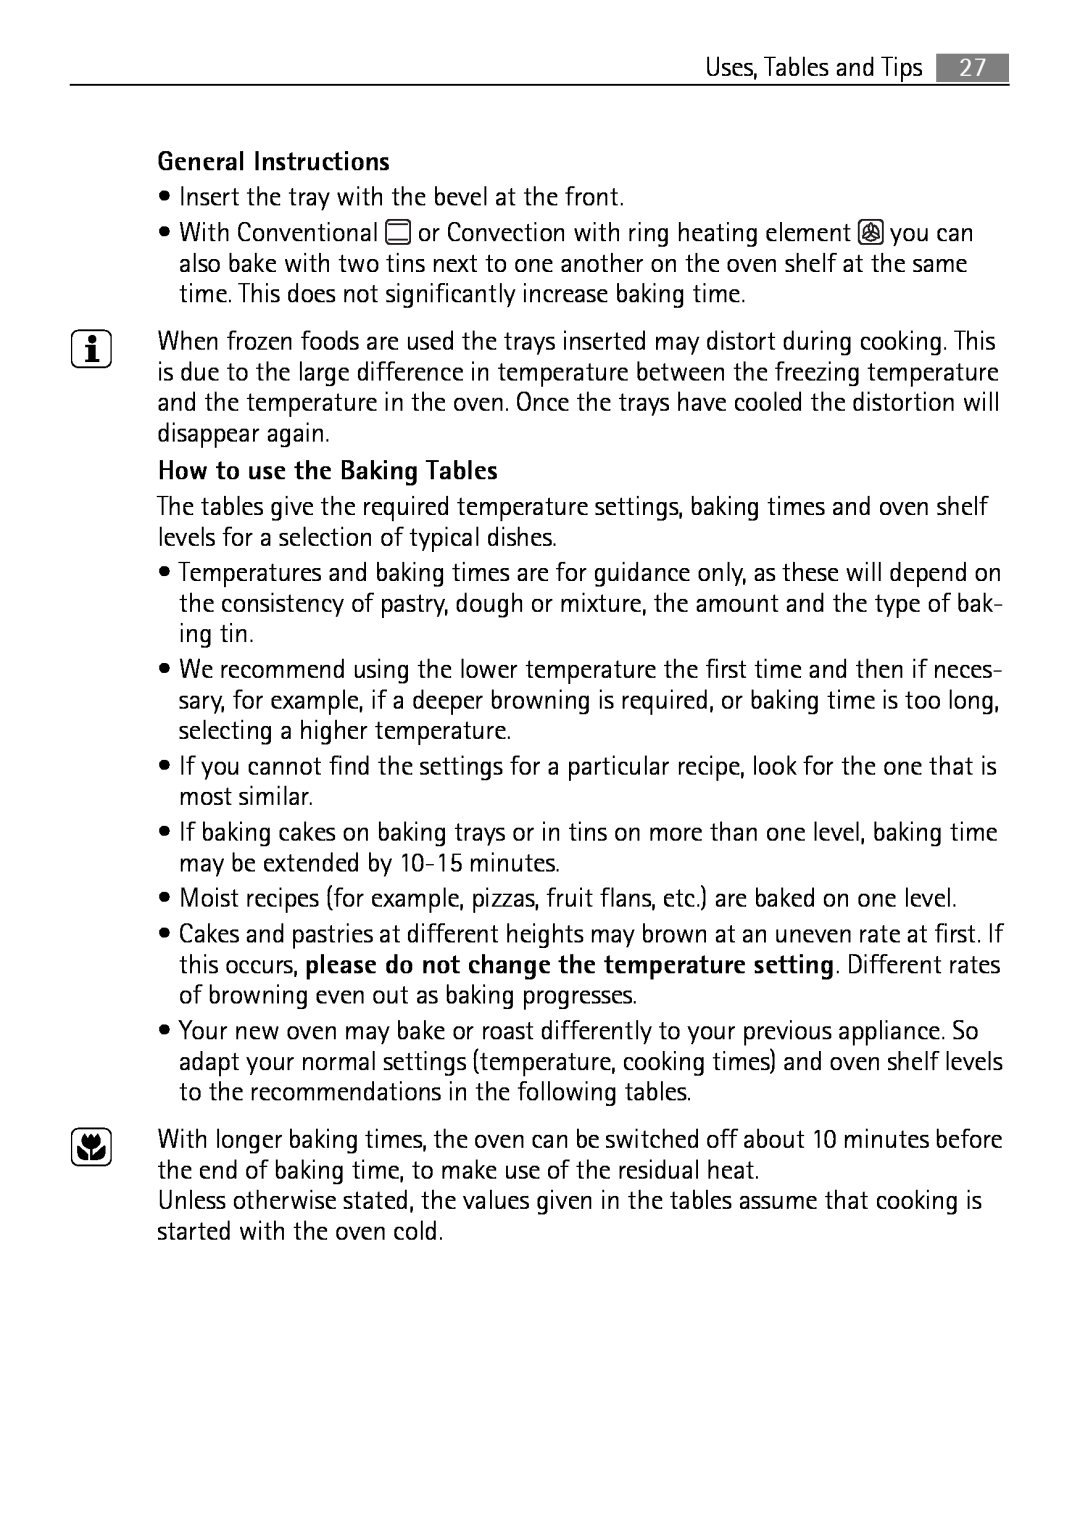 Electrolux E43012-5 user manual General Instructions, How to use the Baking Tables 